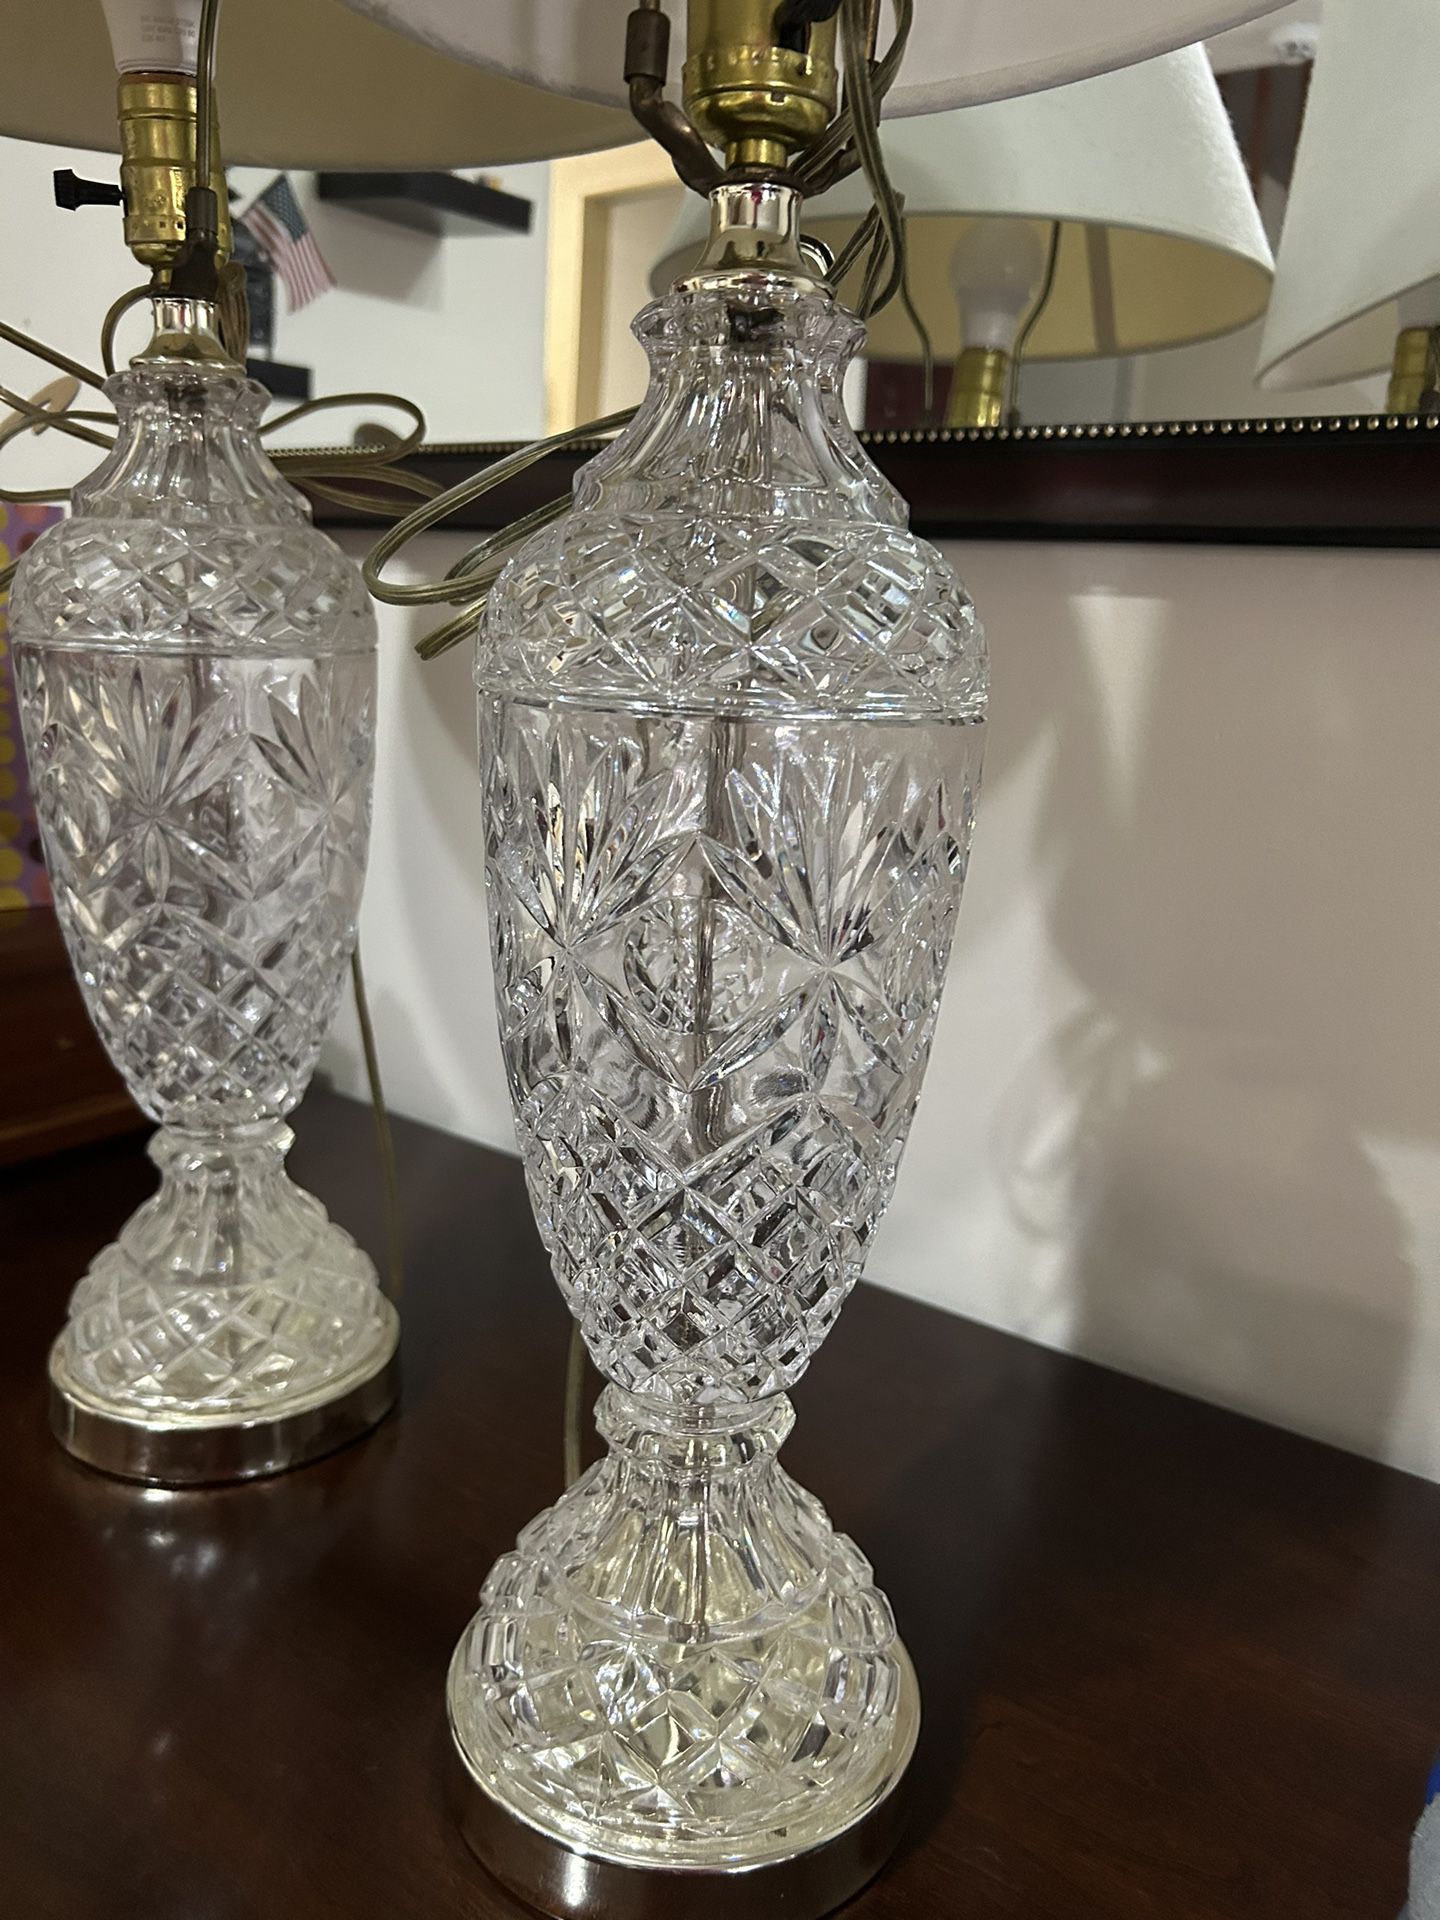 Antique Crystals Lamps